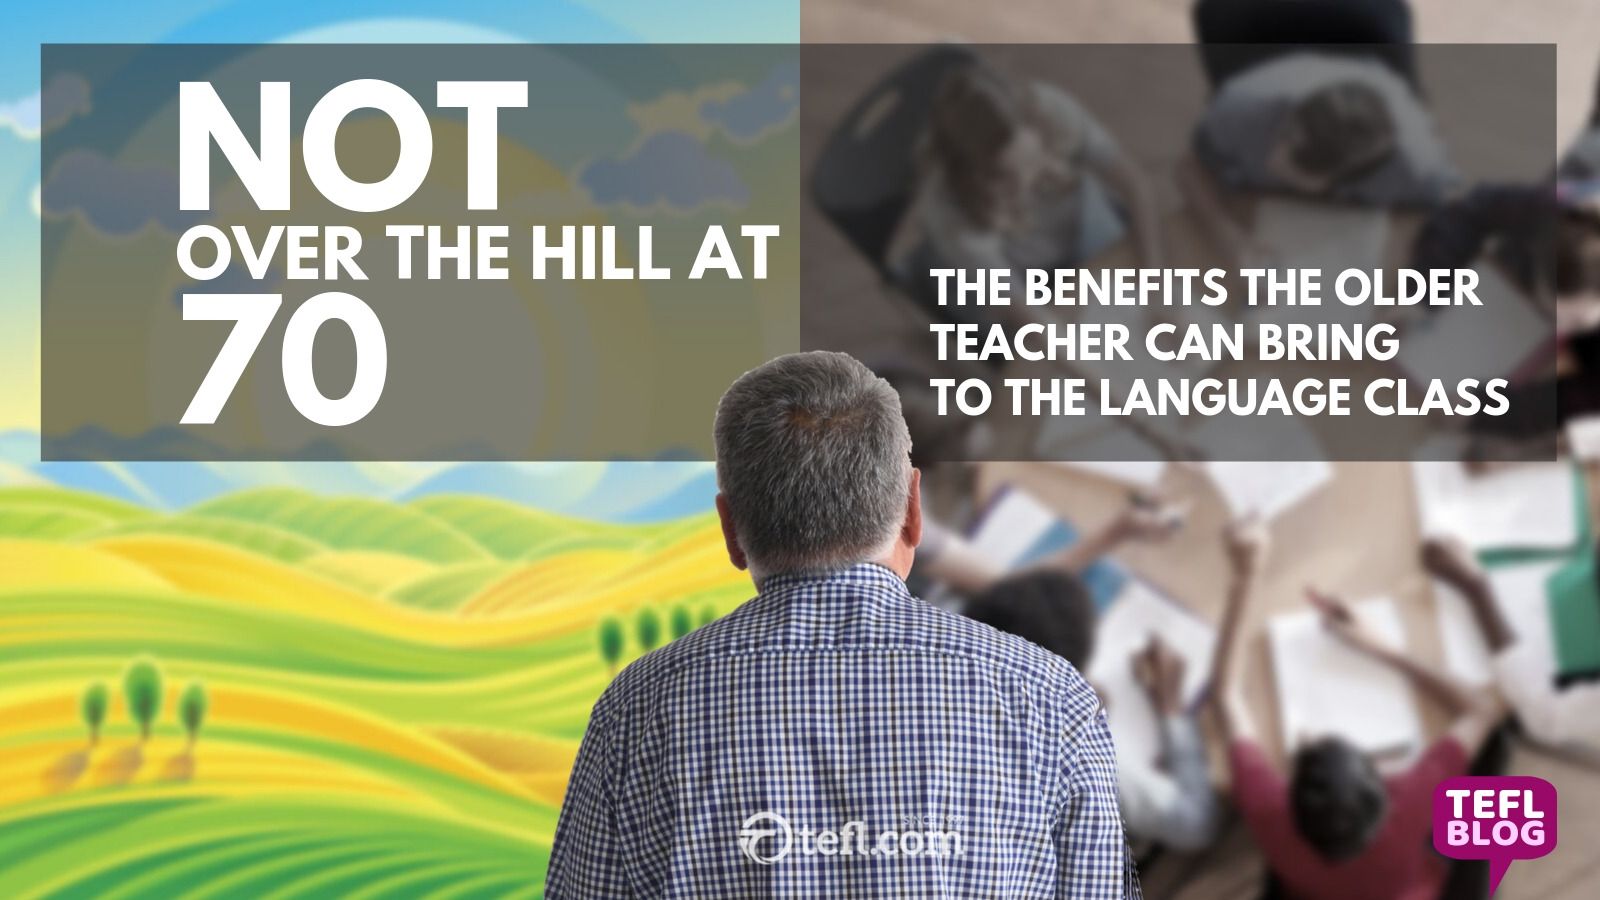 Not over the hill at 70 - The benefits the older teacher can bring to the language class